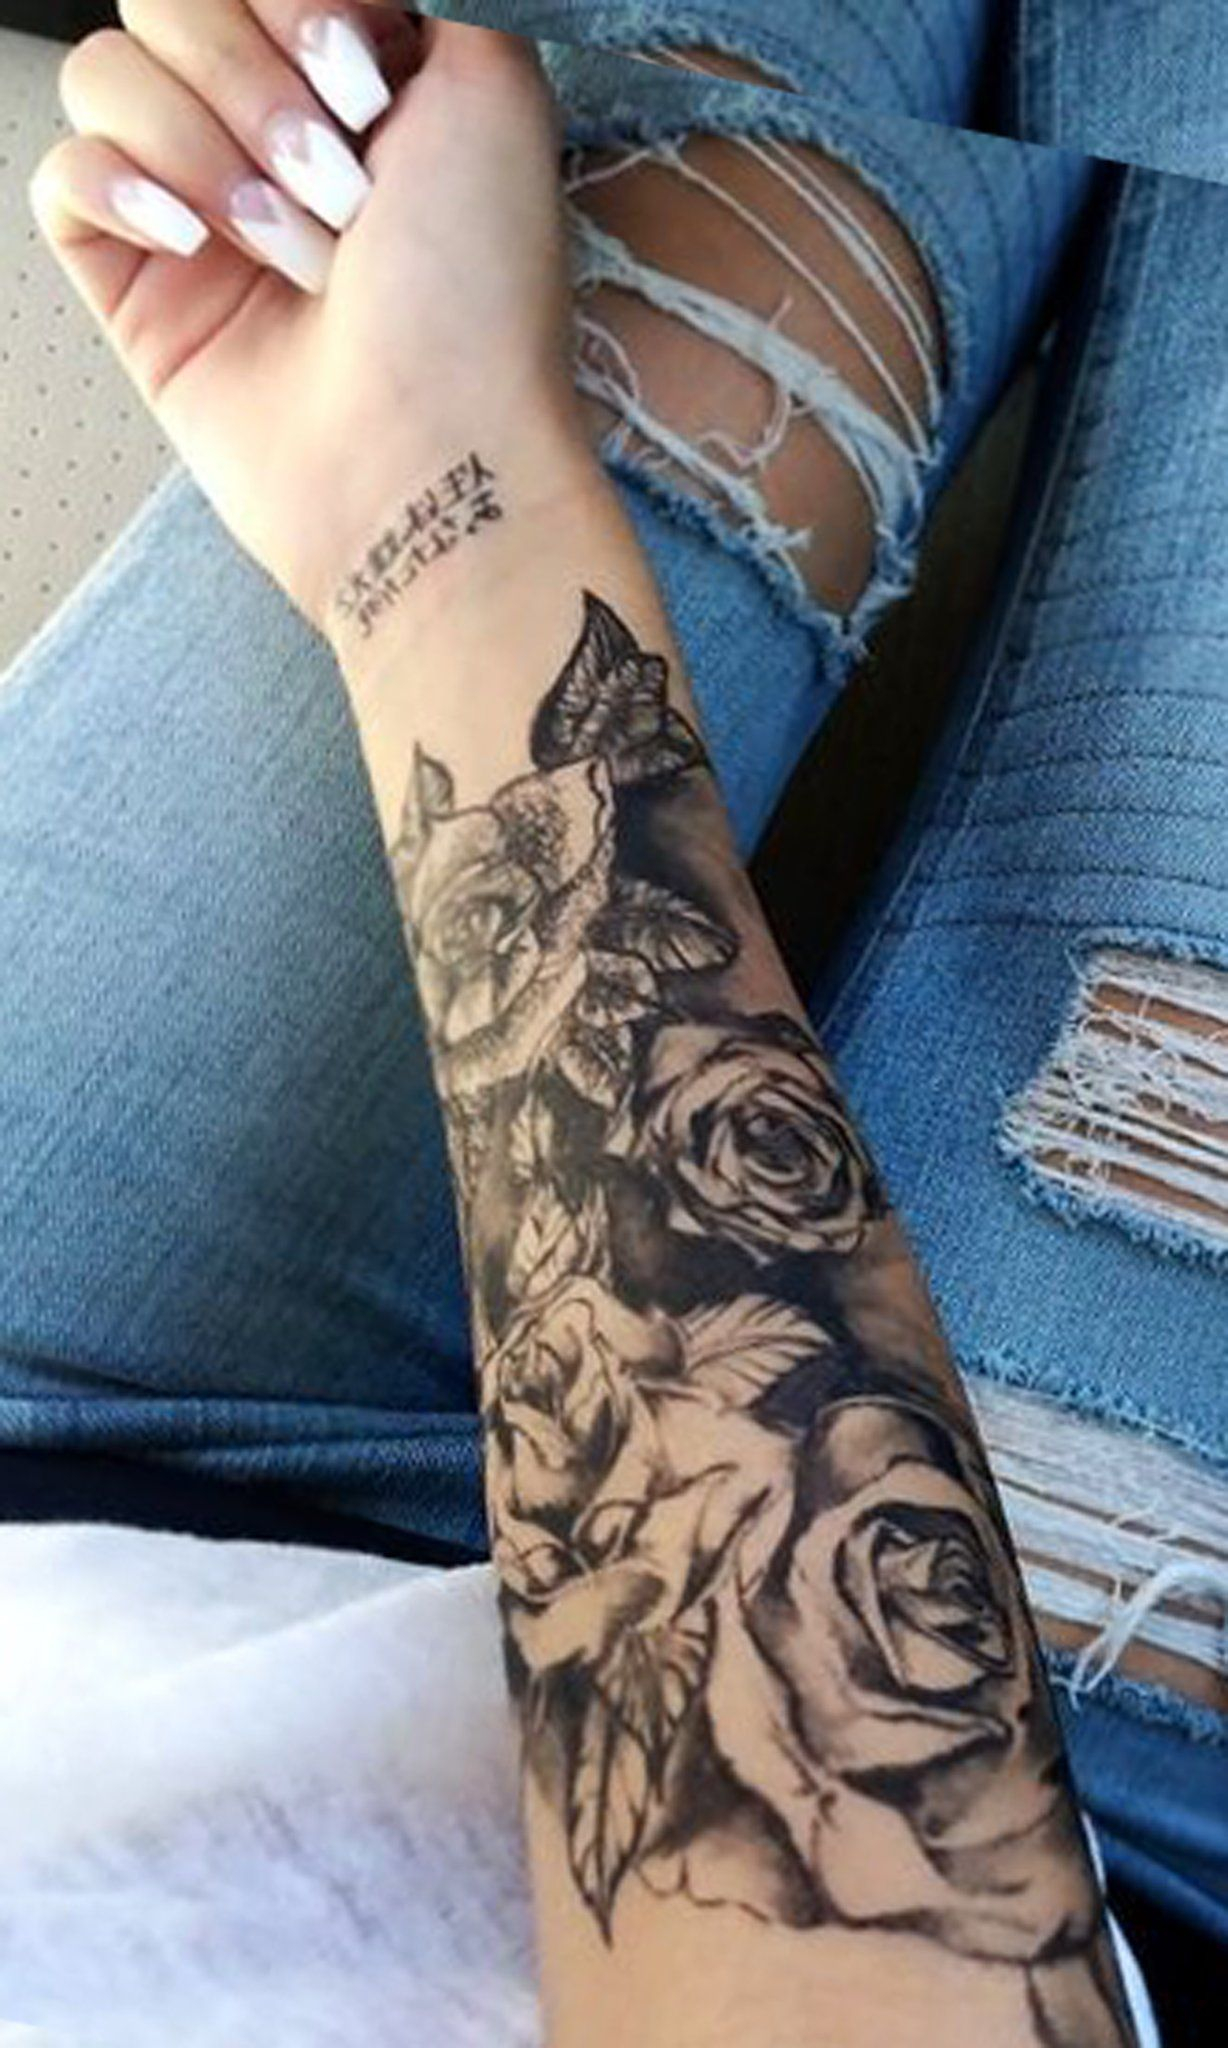 Black Rose Forearm Tattoo Ideas For Women Realistic Floral Flower intended for size 1228 X 2048